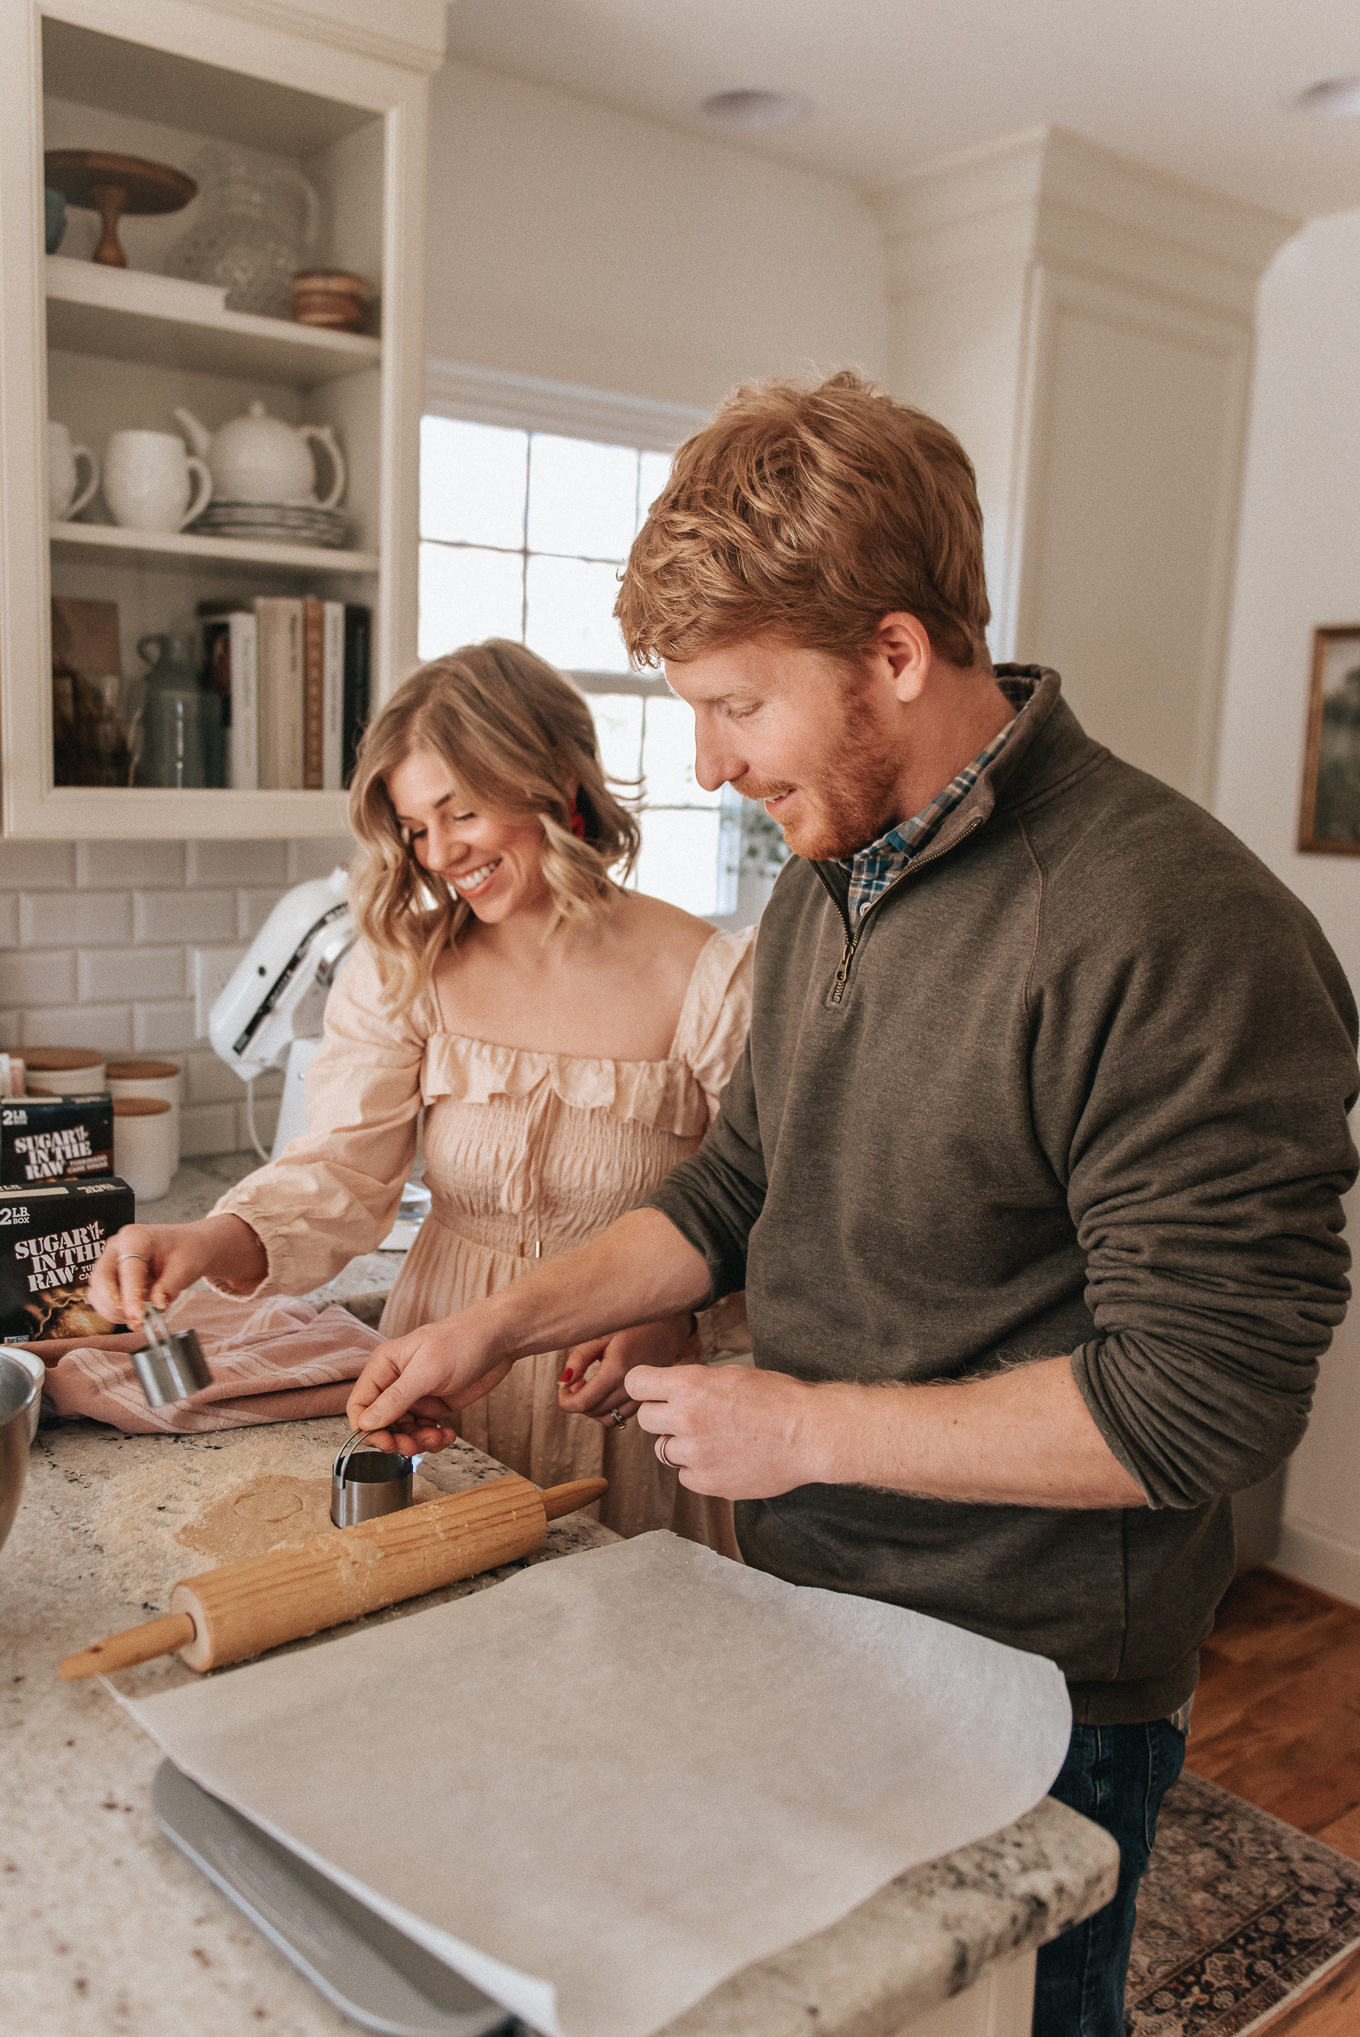 At Home Date Night Idea - Bake-Off | lifestyle | Louella Reese